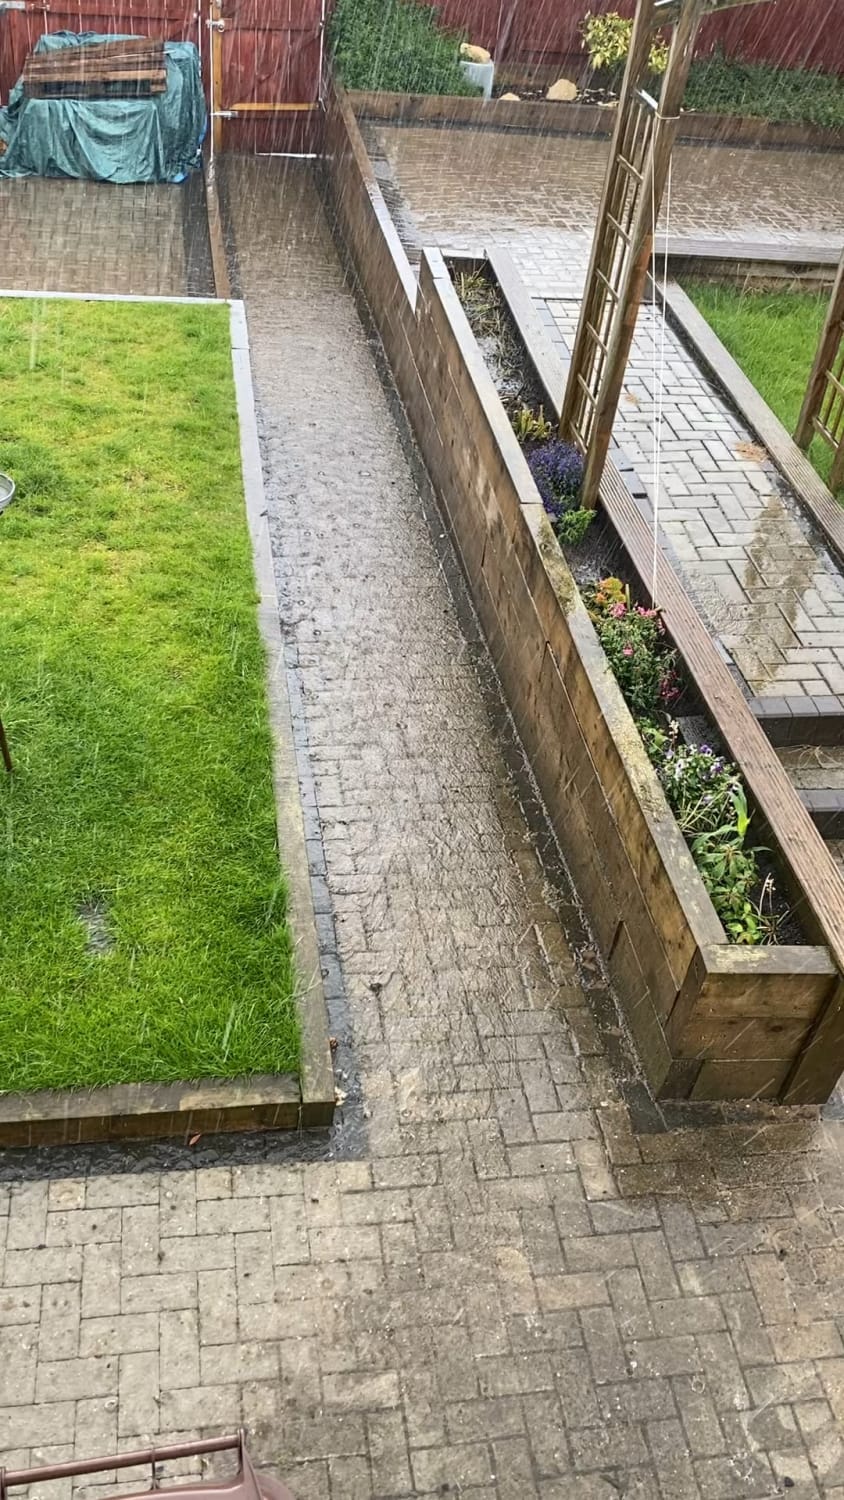 The path in my garden was designed to channel rain water to let it run away